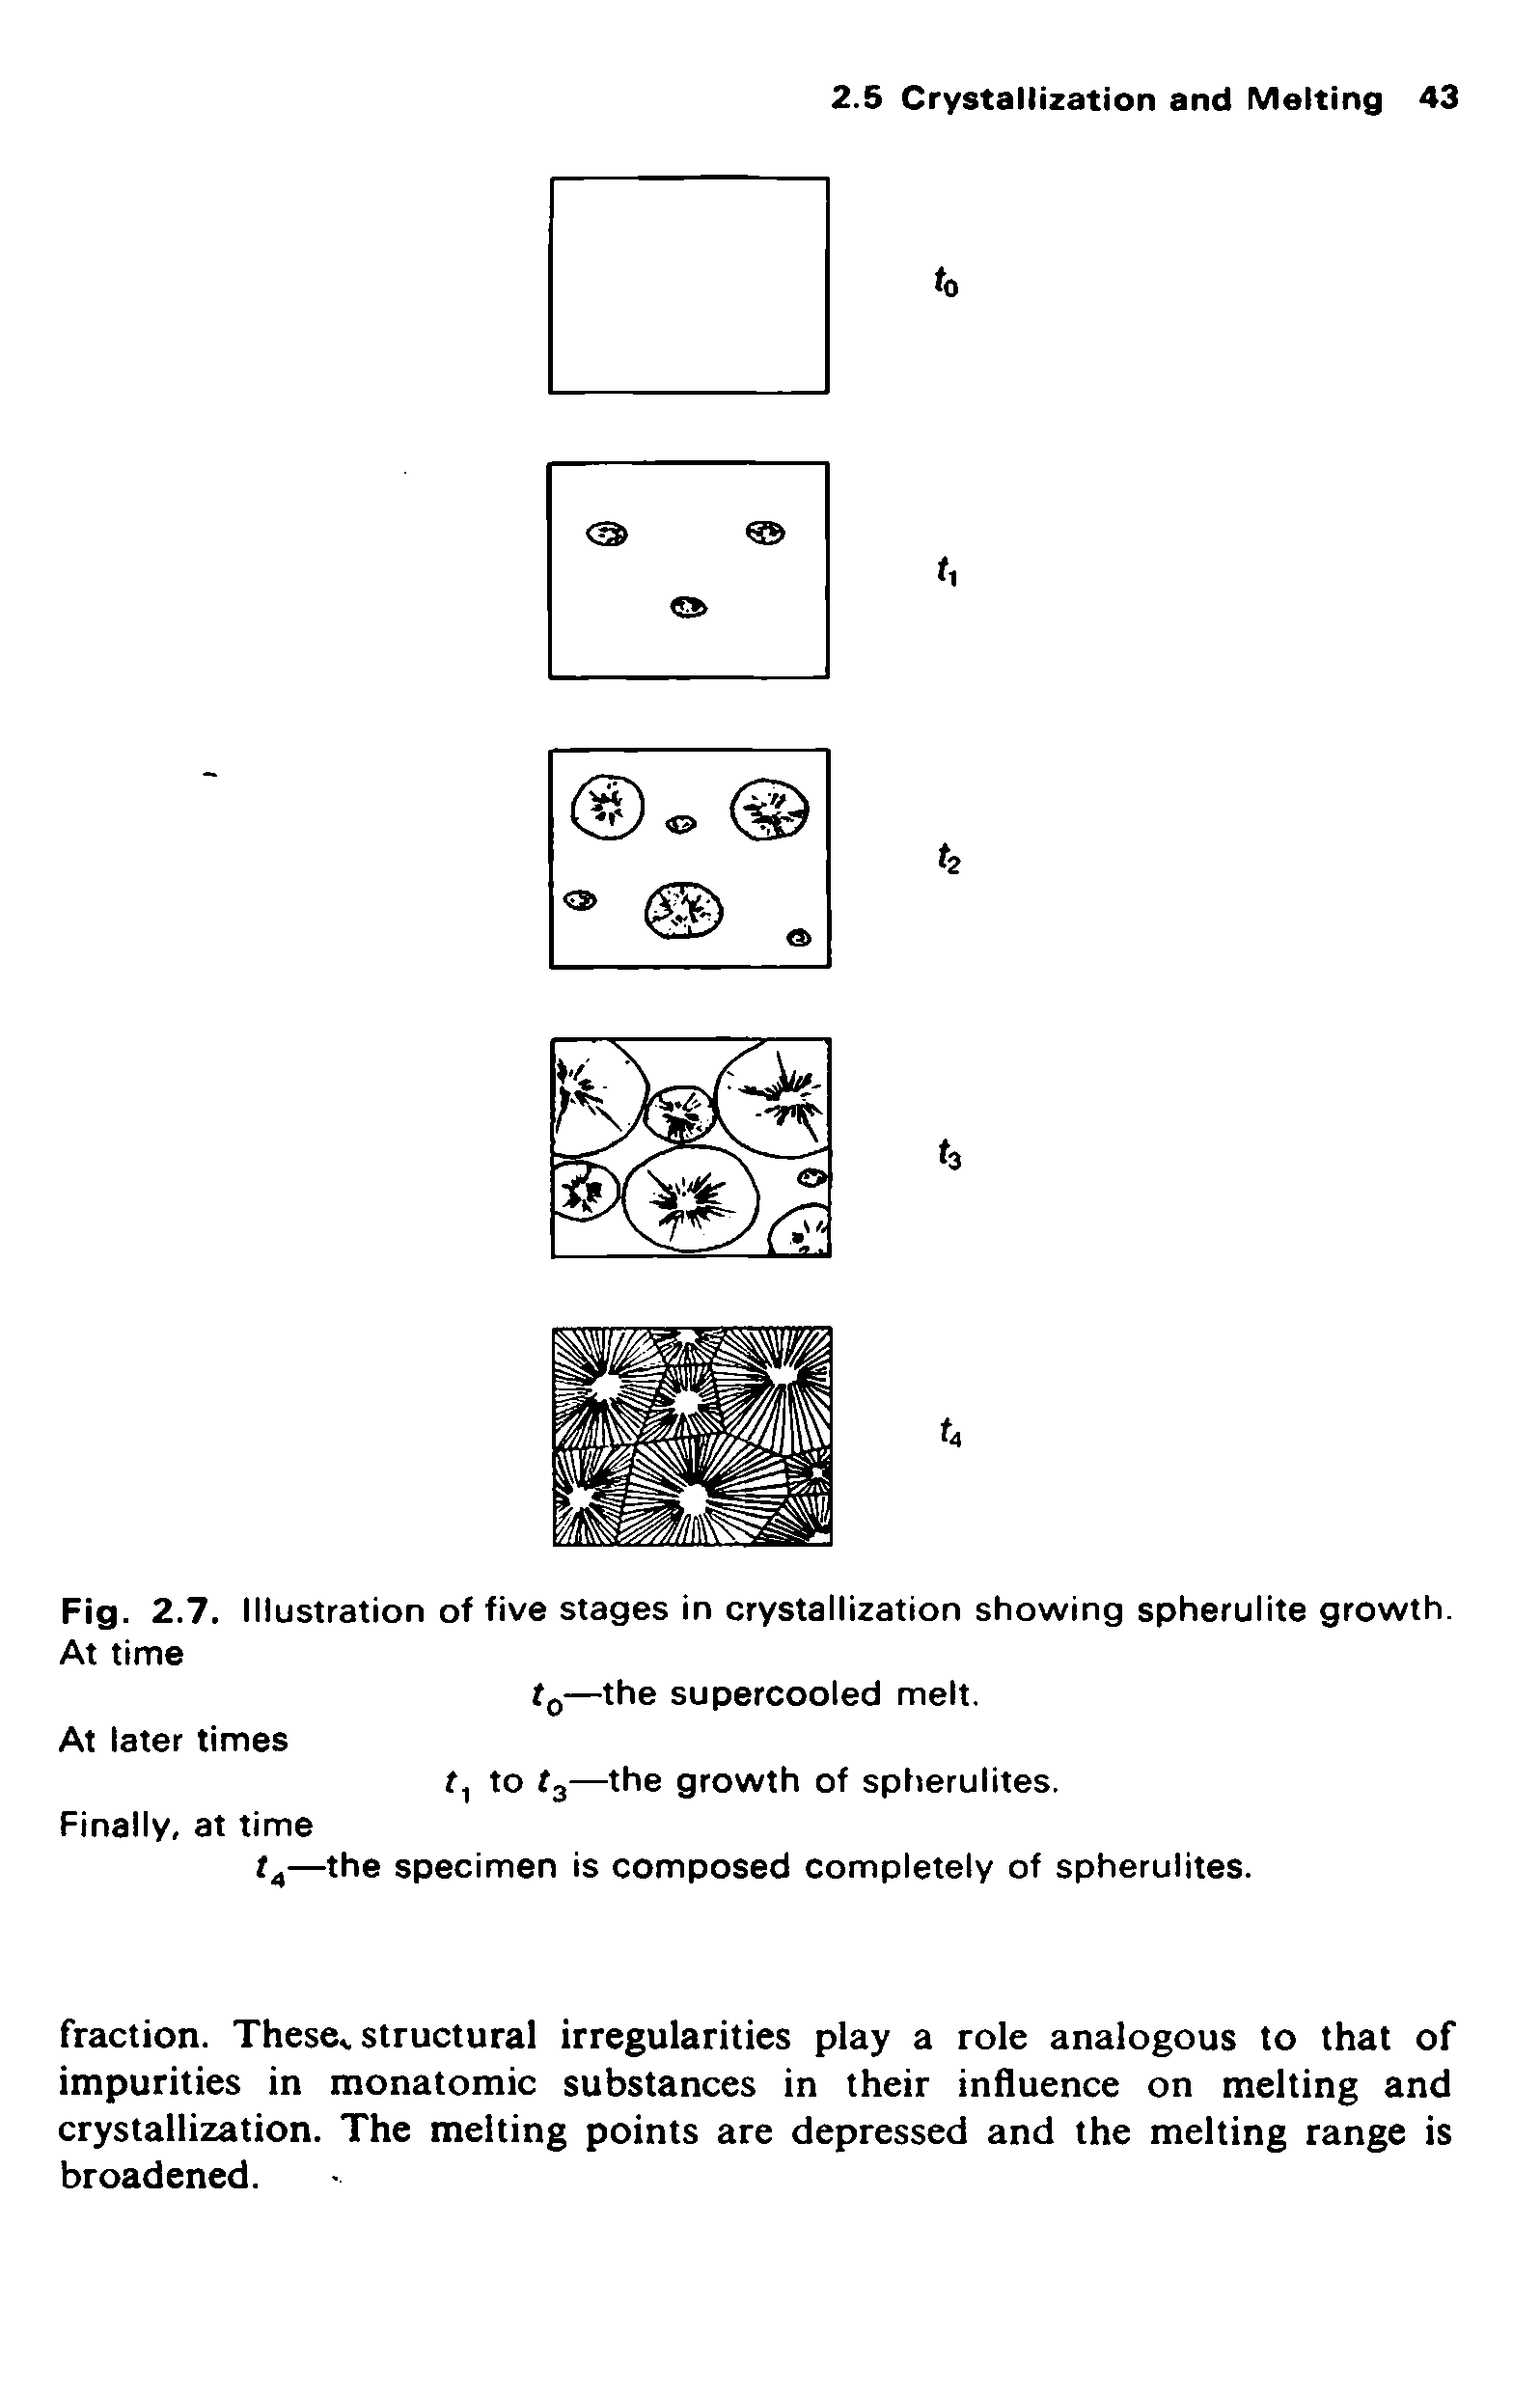 Fig. 2.7. Illustration of five stages in crystallization showing spherulite growth. At time...